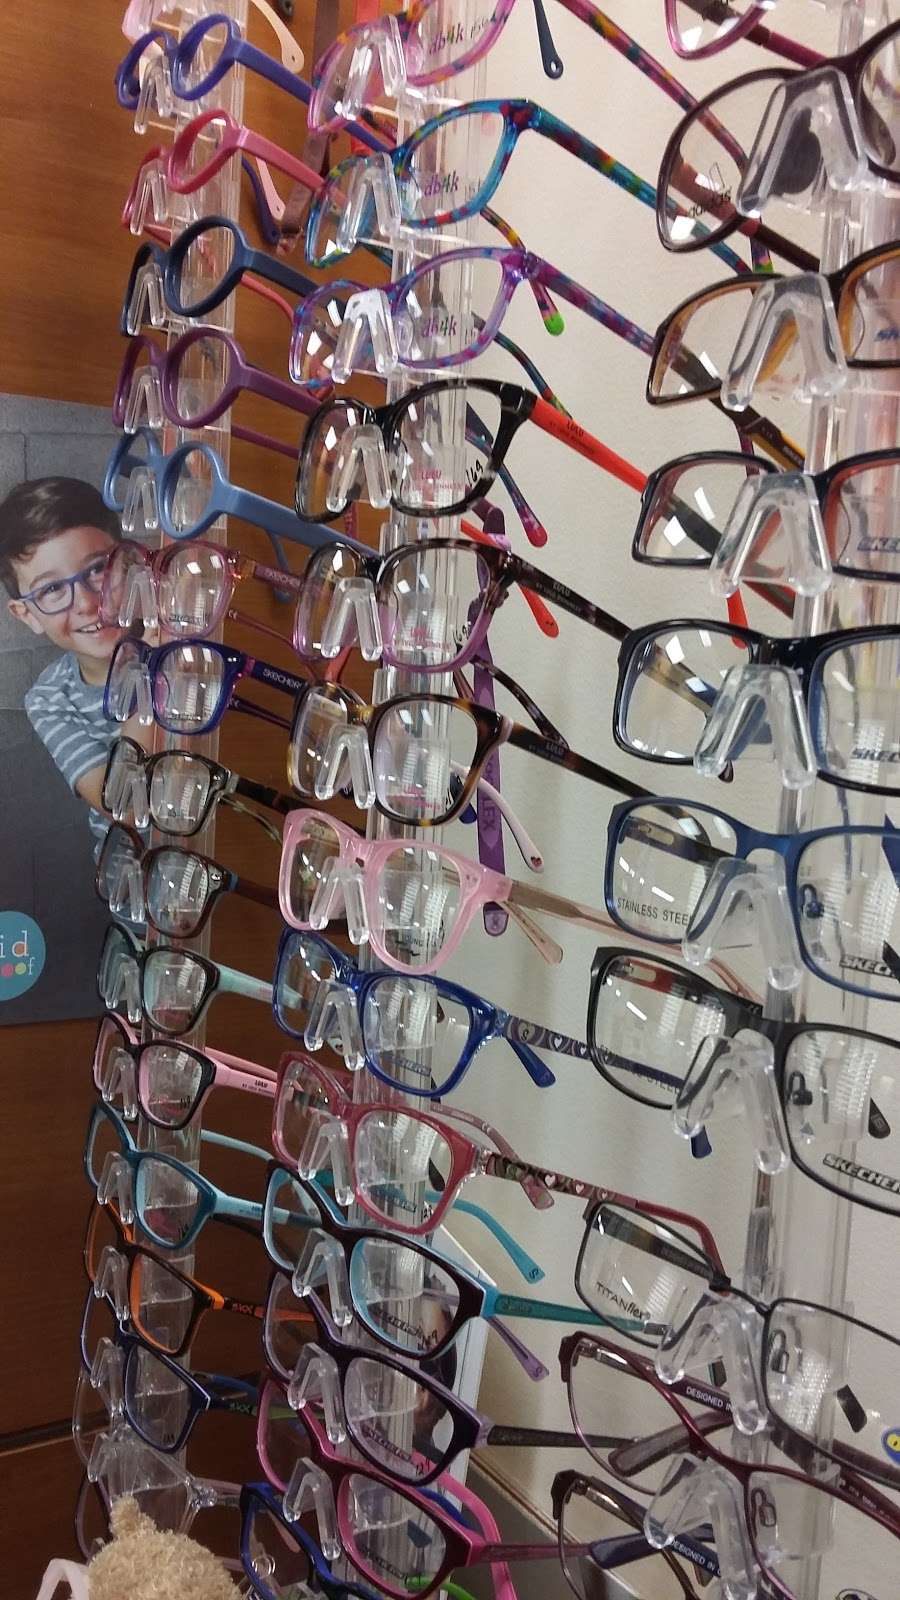 Bowers & Snyder Opticians | 5817, 6569 N Charles St # 305, Towson, MD 21204, USA | Phone: (410) 494-0021